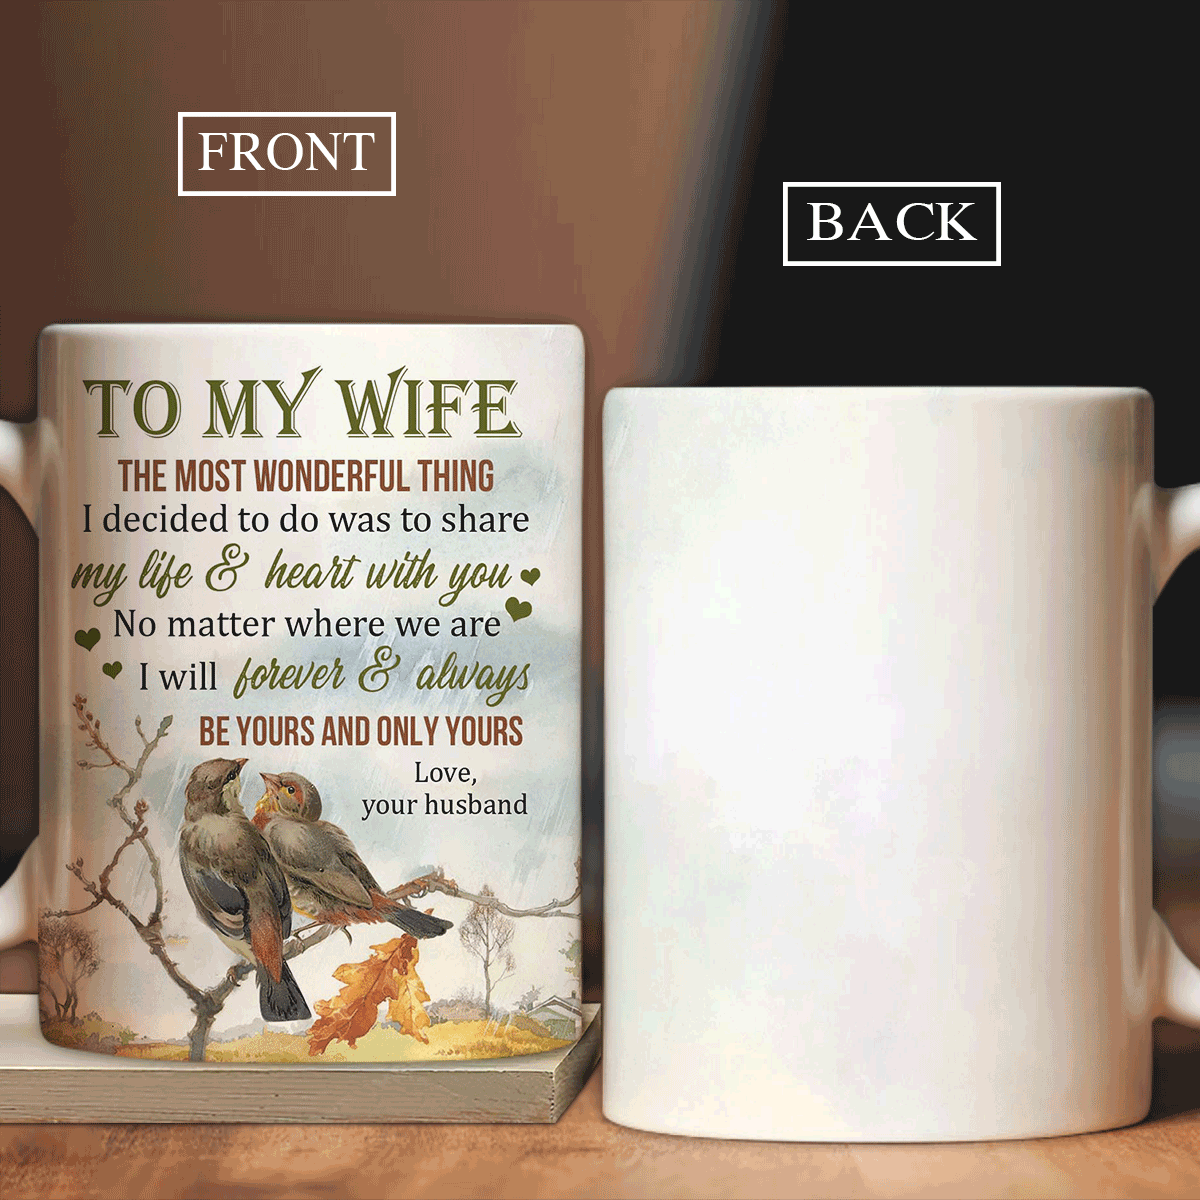 Couple AOP Mug- To my wife, Brown sparrow, Autumn forest Mug - Gift for couple, lover - I will forever and always be yours and only yours - Family Mug